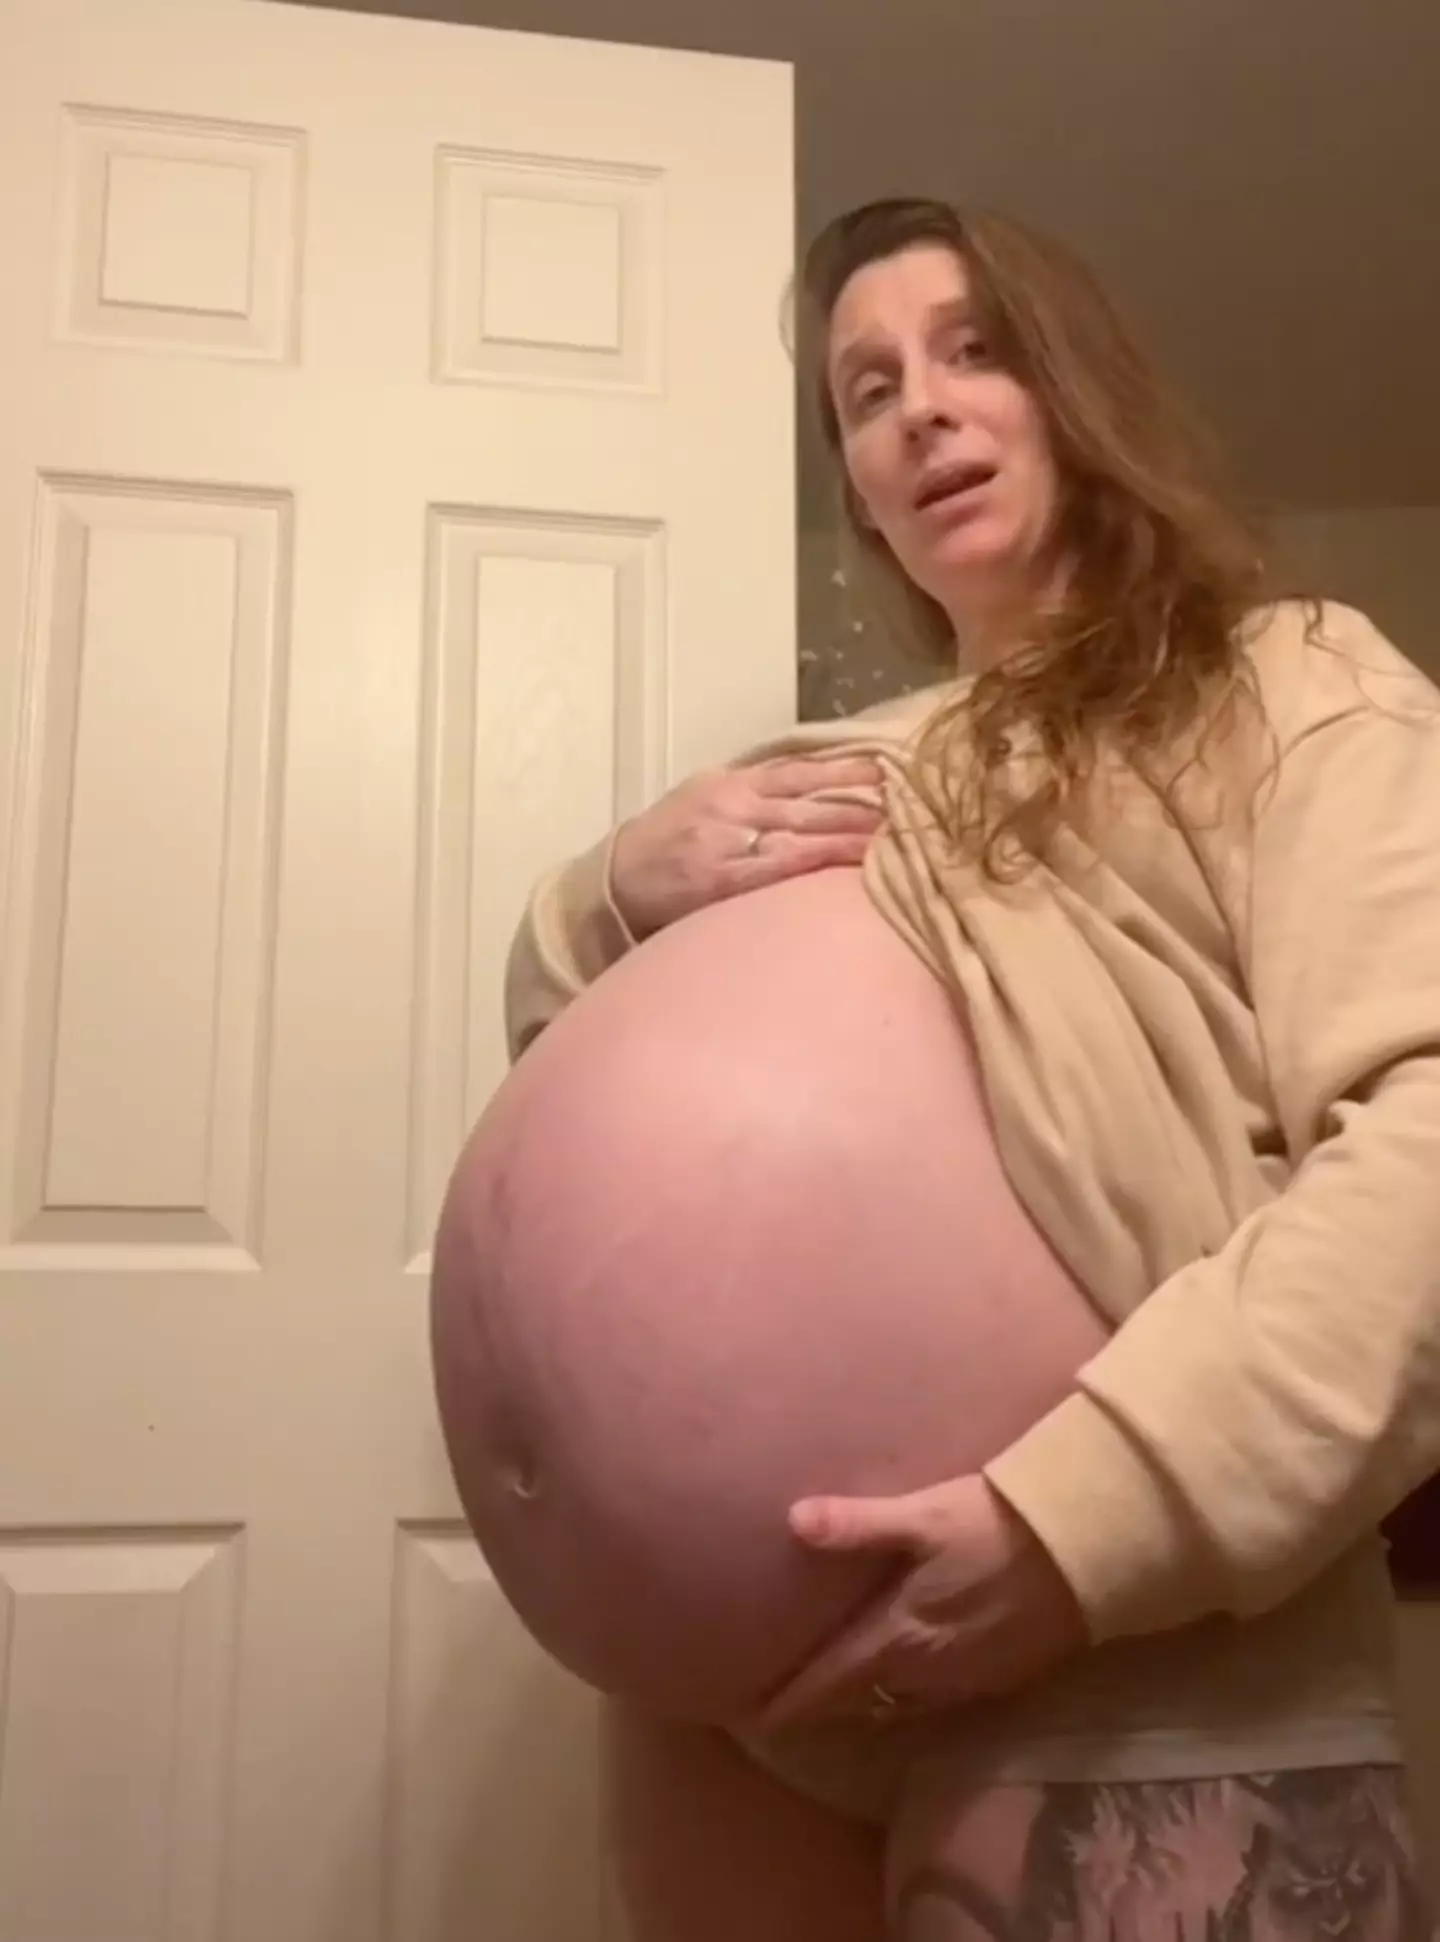 Pregnant mum stuns the internet with size of baby bump - 9Honey